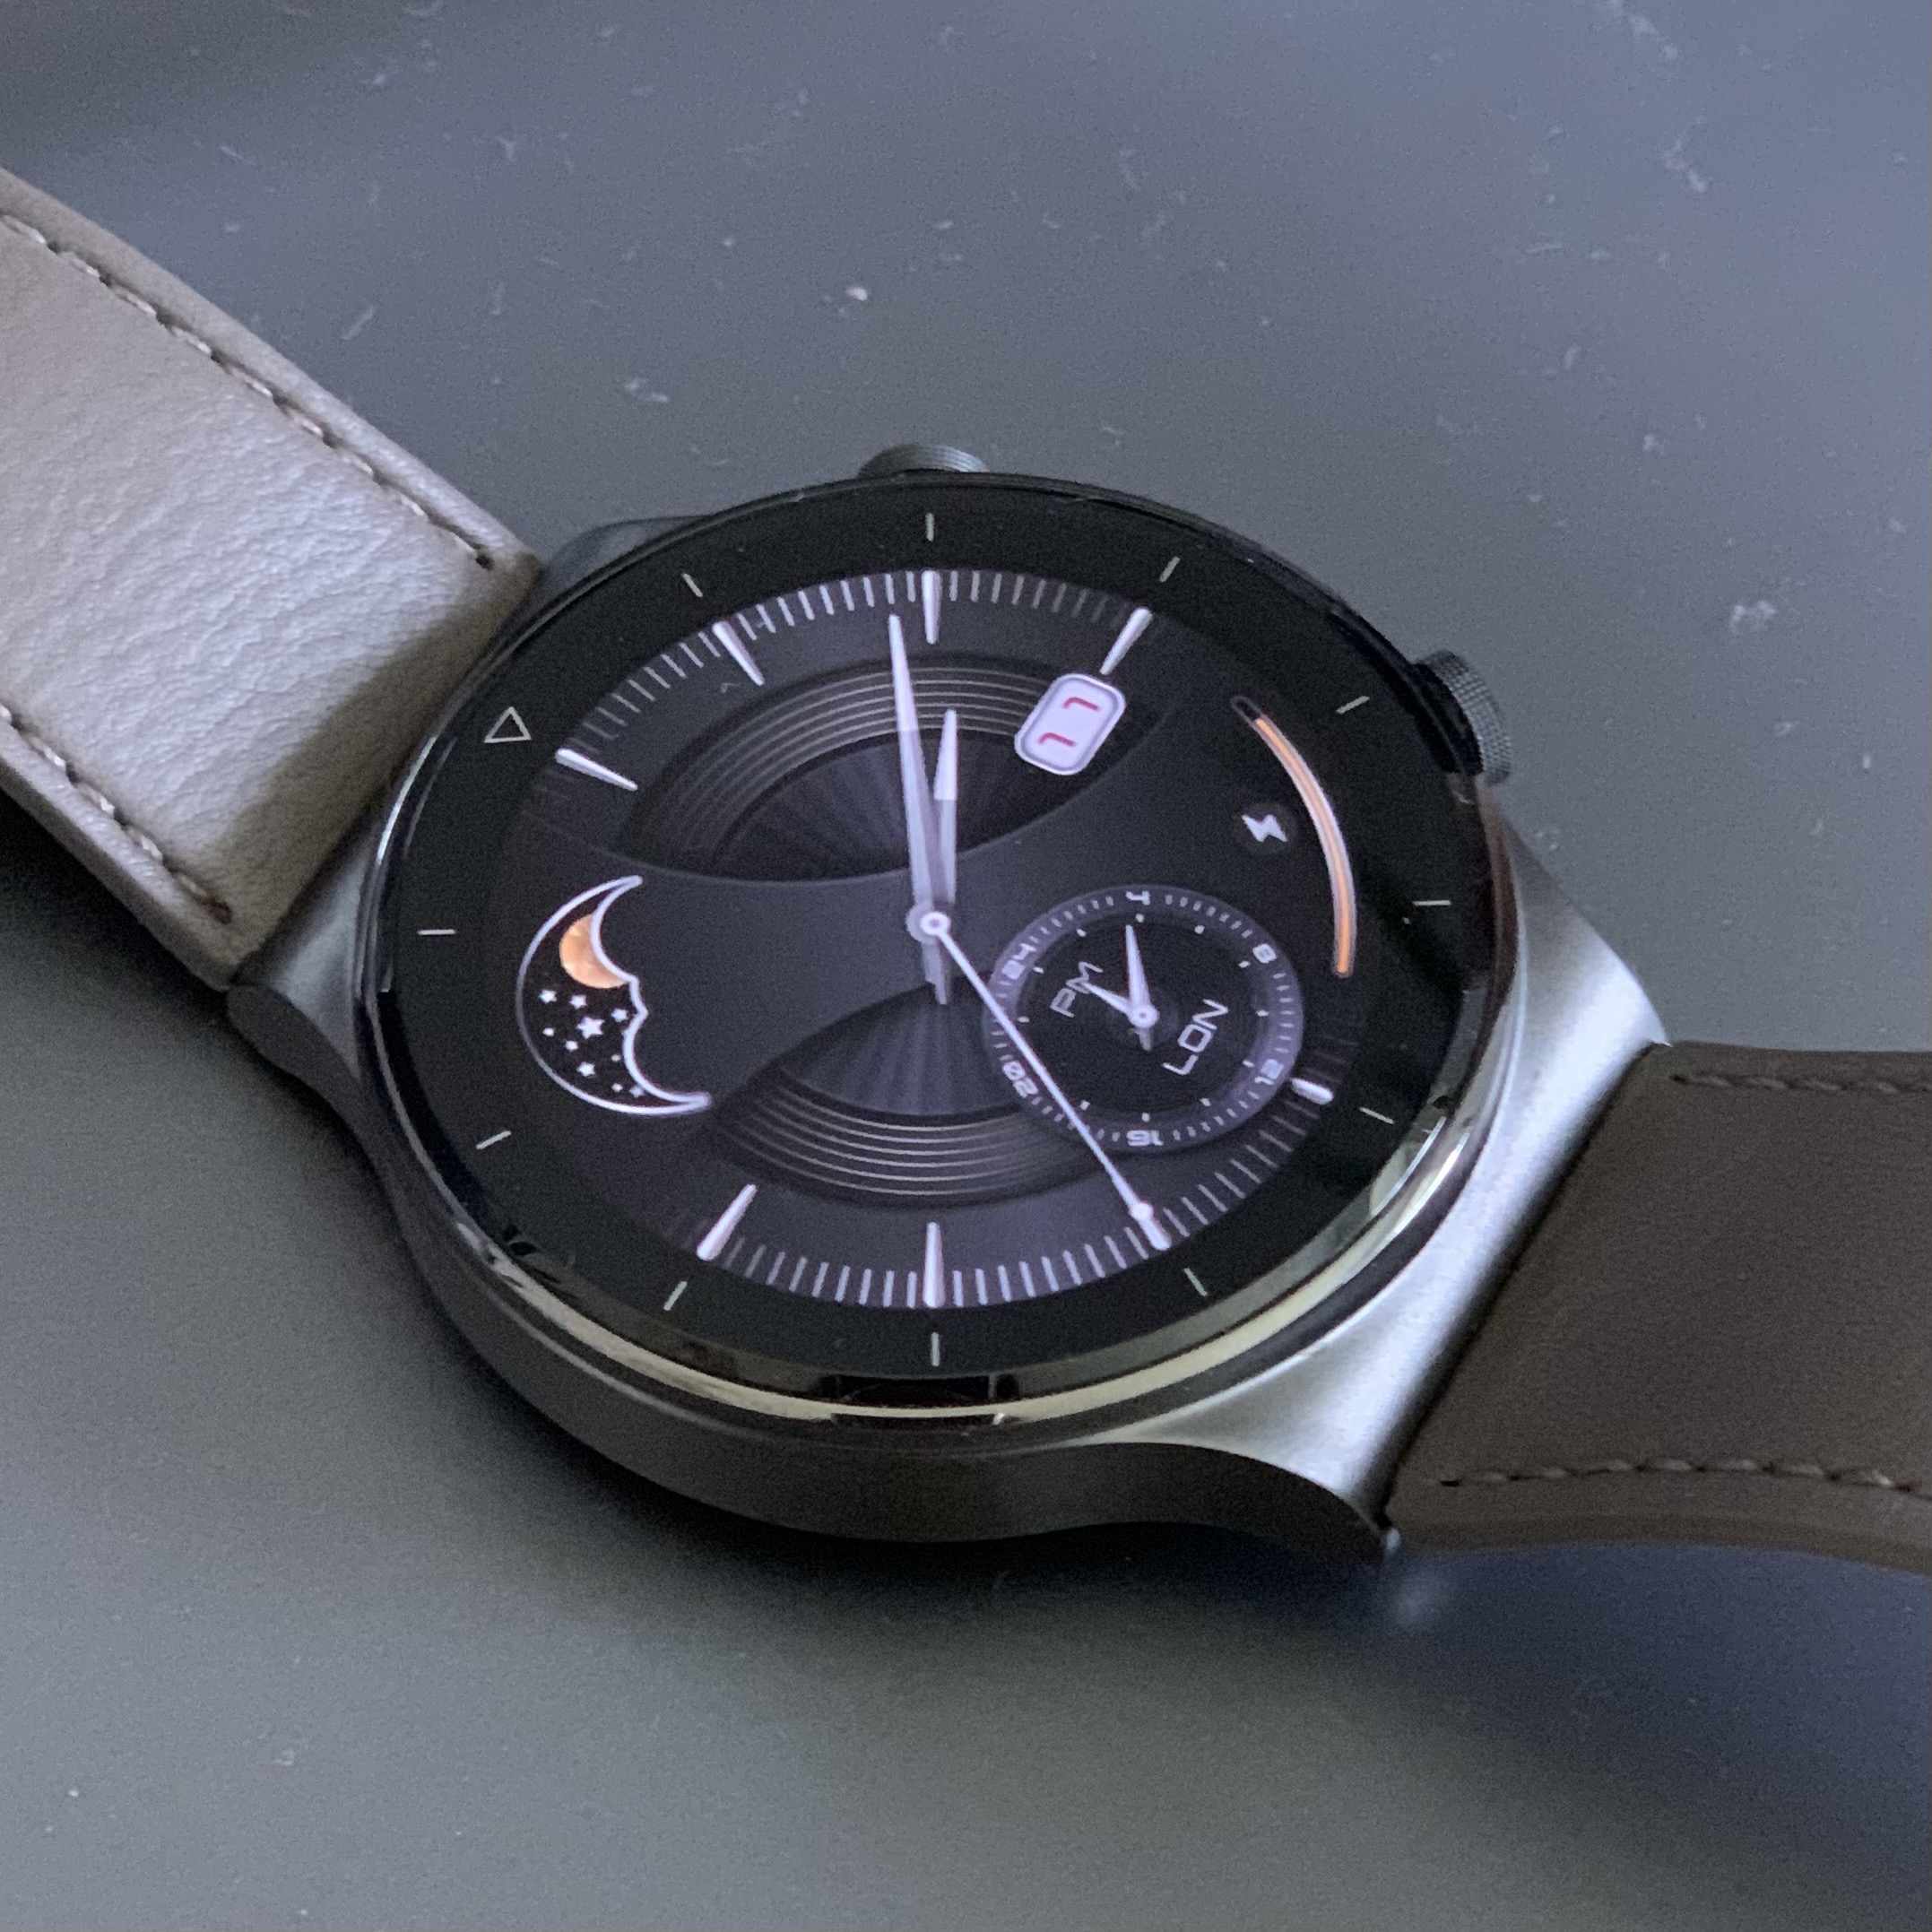 Huawei Gt Latest Watch : Latest Huawei Watch GT update adds new elegant watch faces - The huawei 